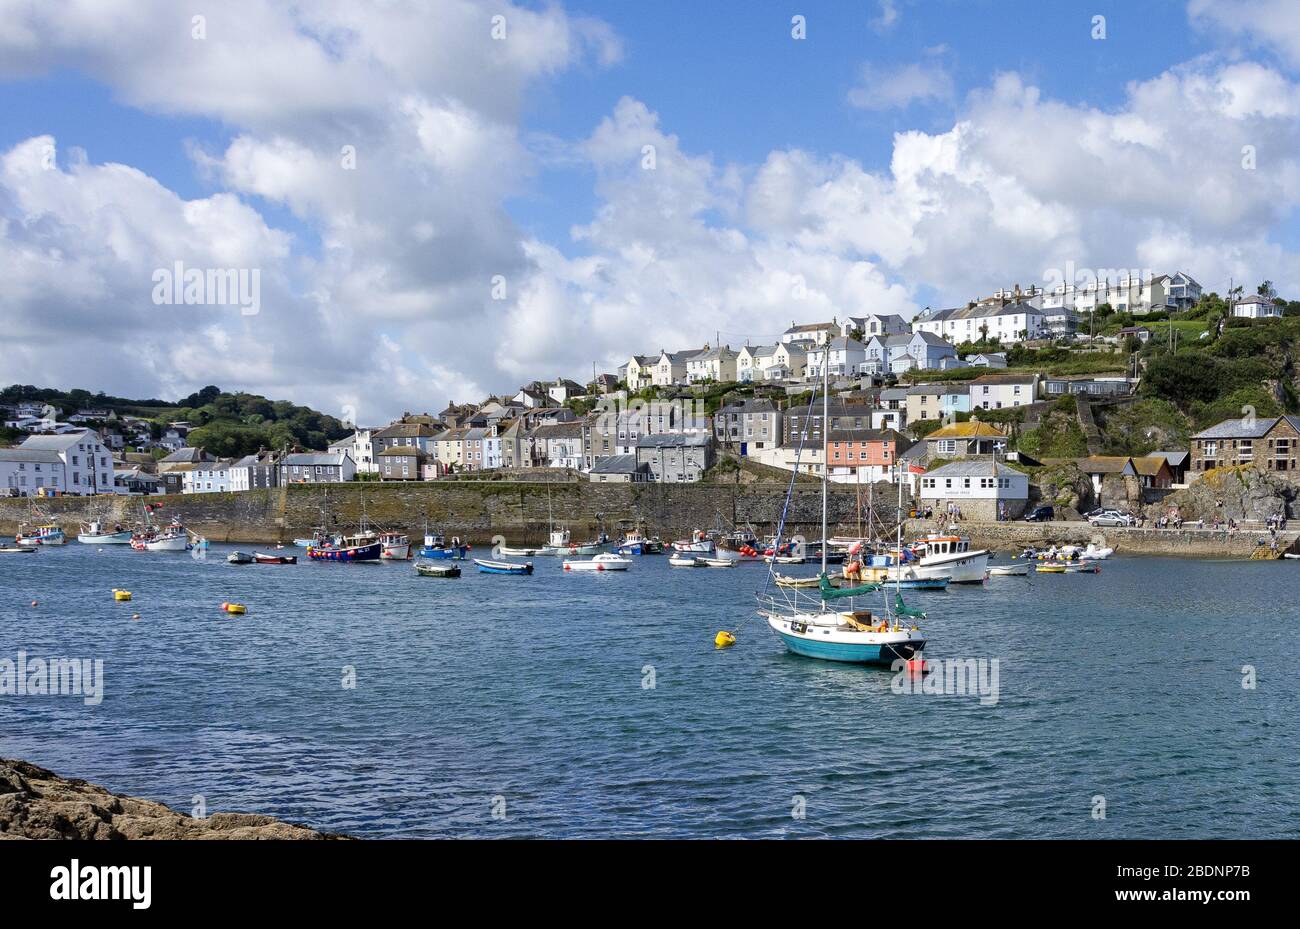 The charming village harbour of Mevagissey, a fishing port in Cornwall, England, UK Stock Photo